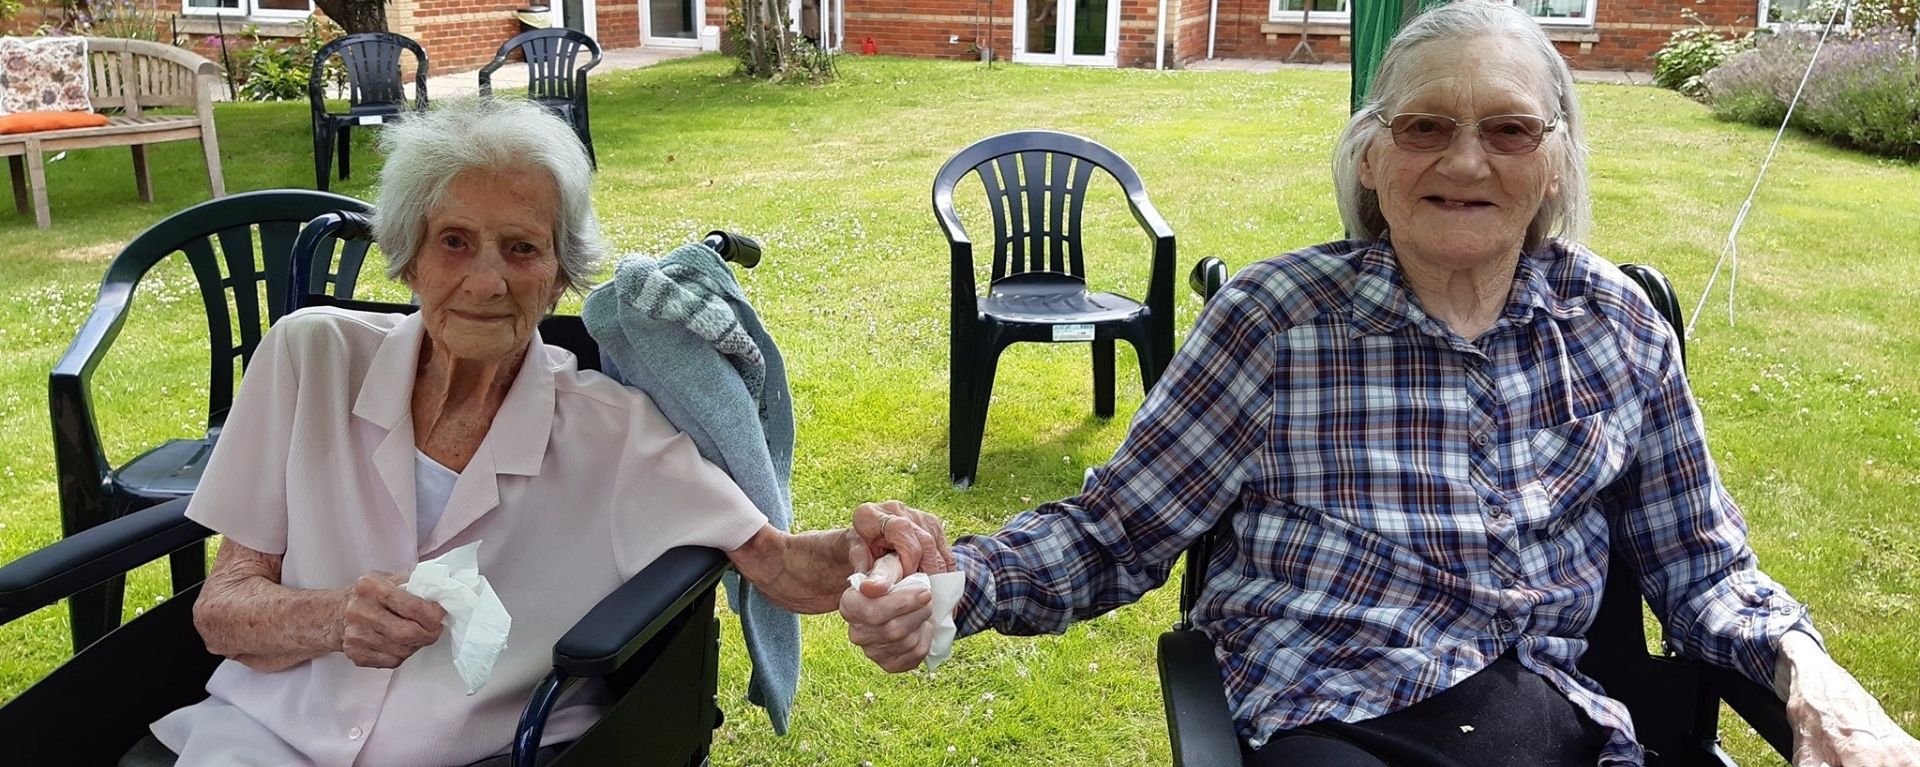 Laurel Care home residents holding hands in the garden